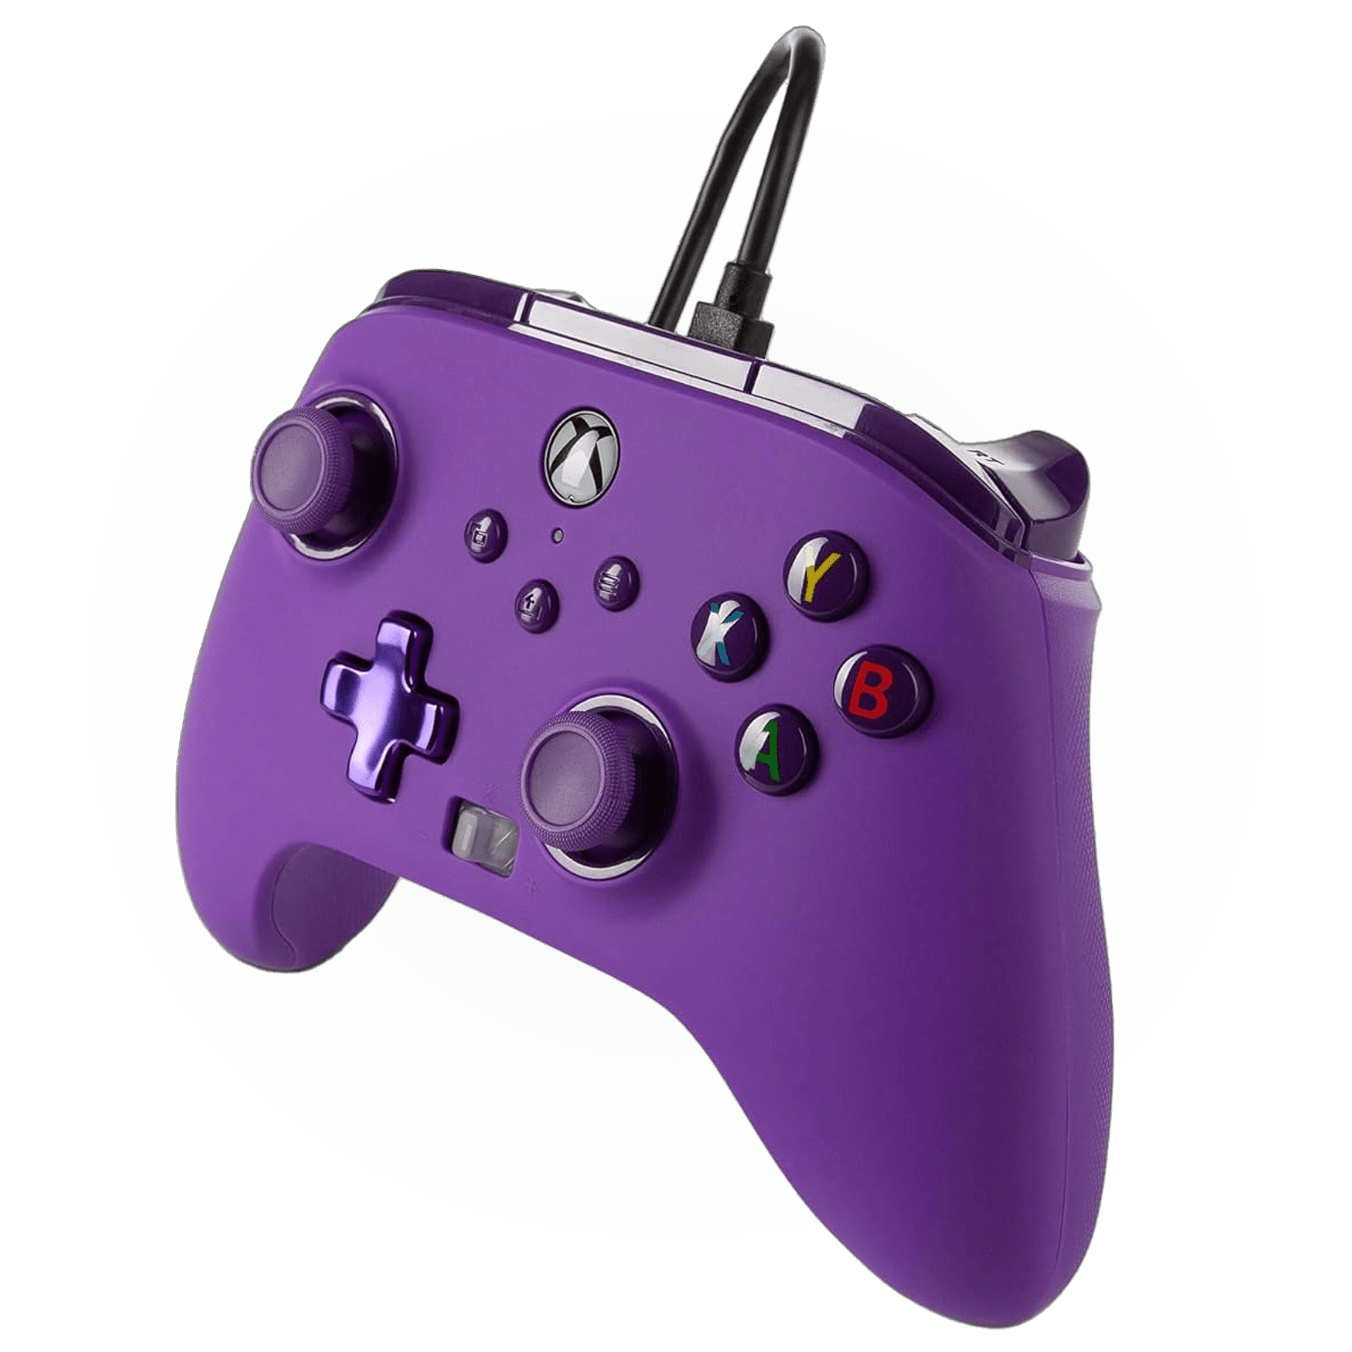 PowerA Enhanced Wired Controller For Xbox Series X|S With 2 Re-mappable Buttons - Royal Purple - ModdedZone